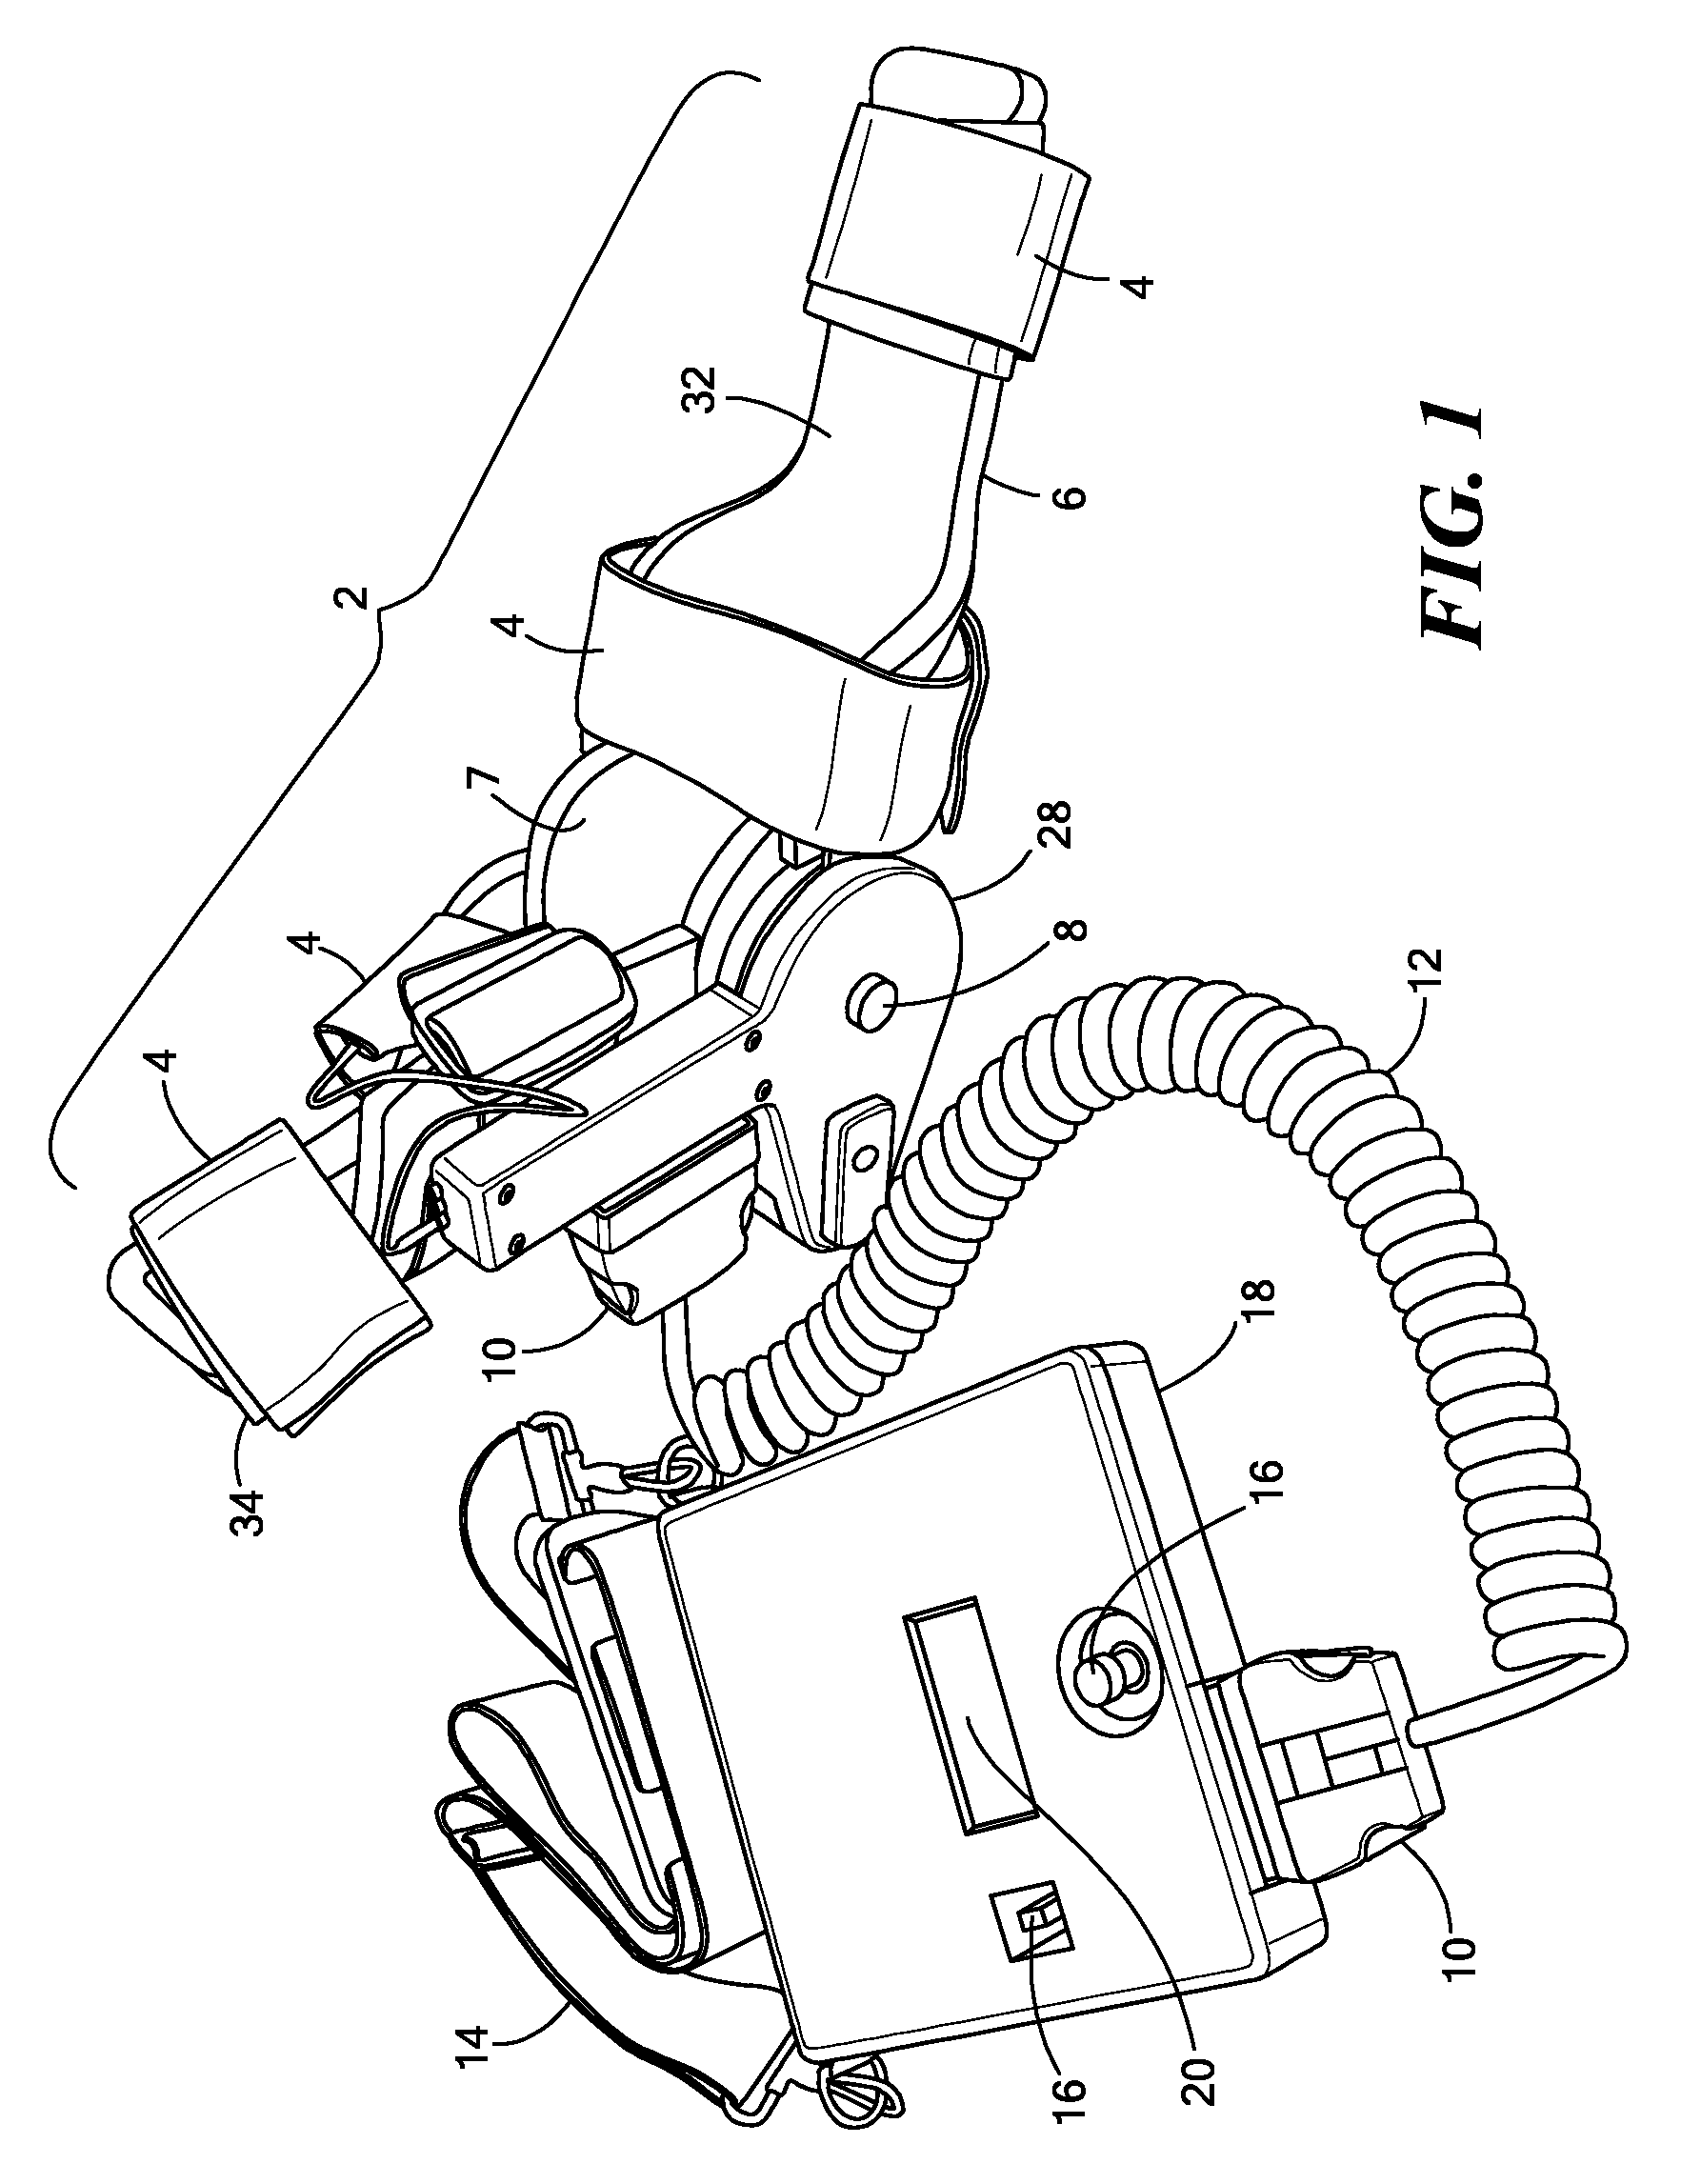 Powered Orthotic Device and Method of Using Same